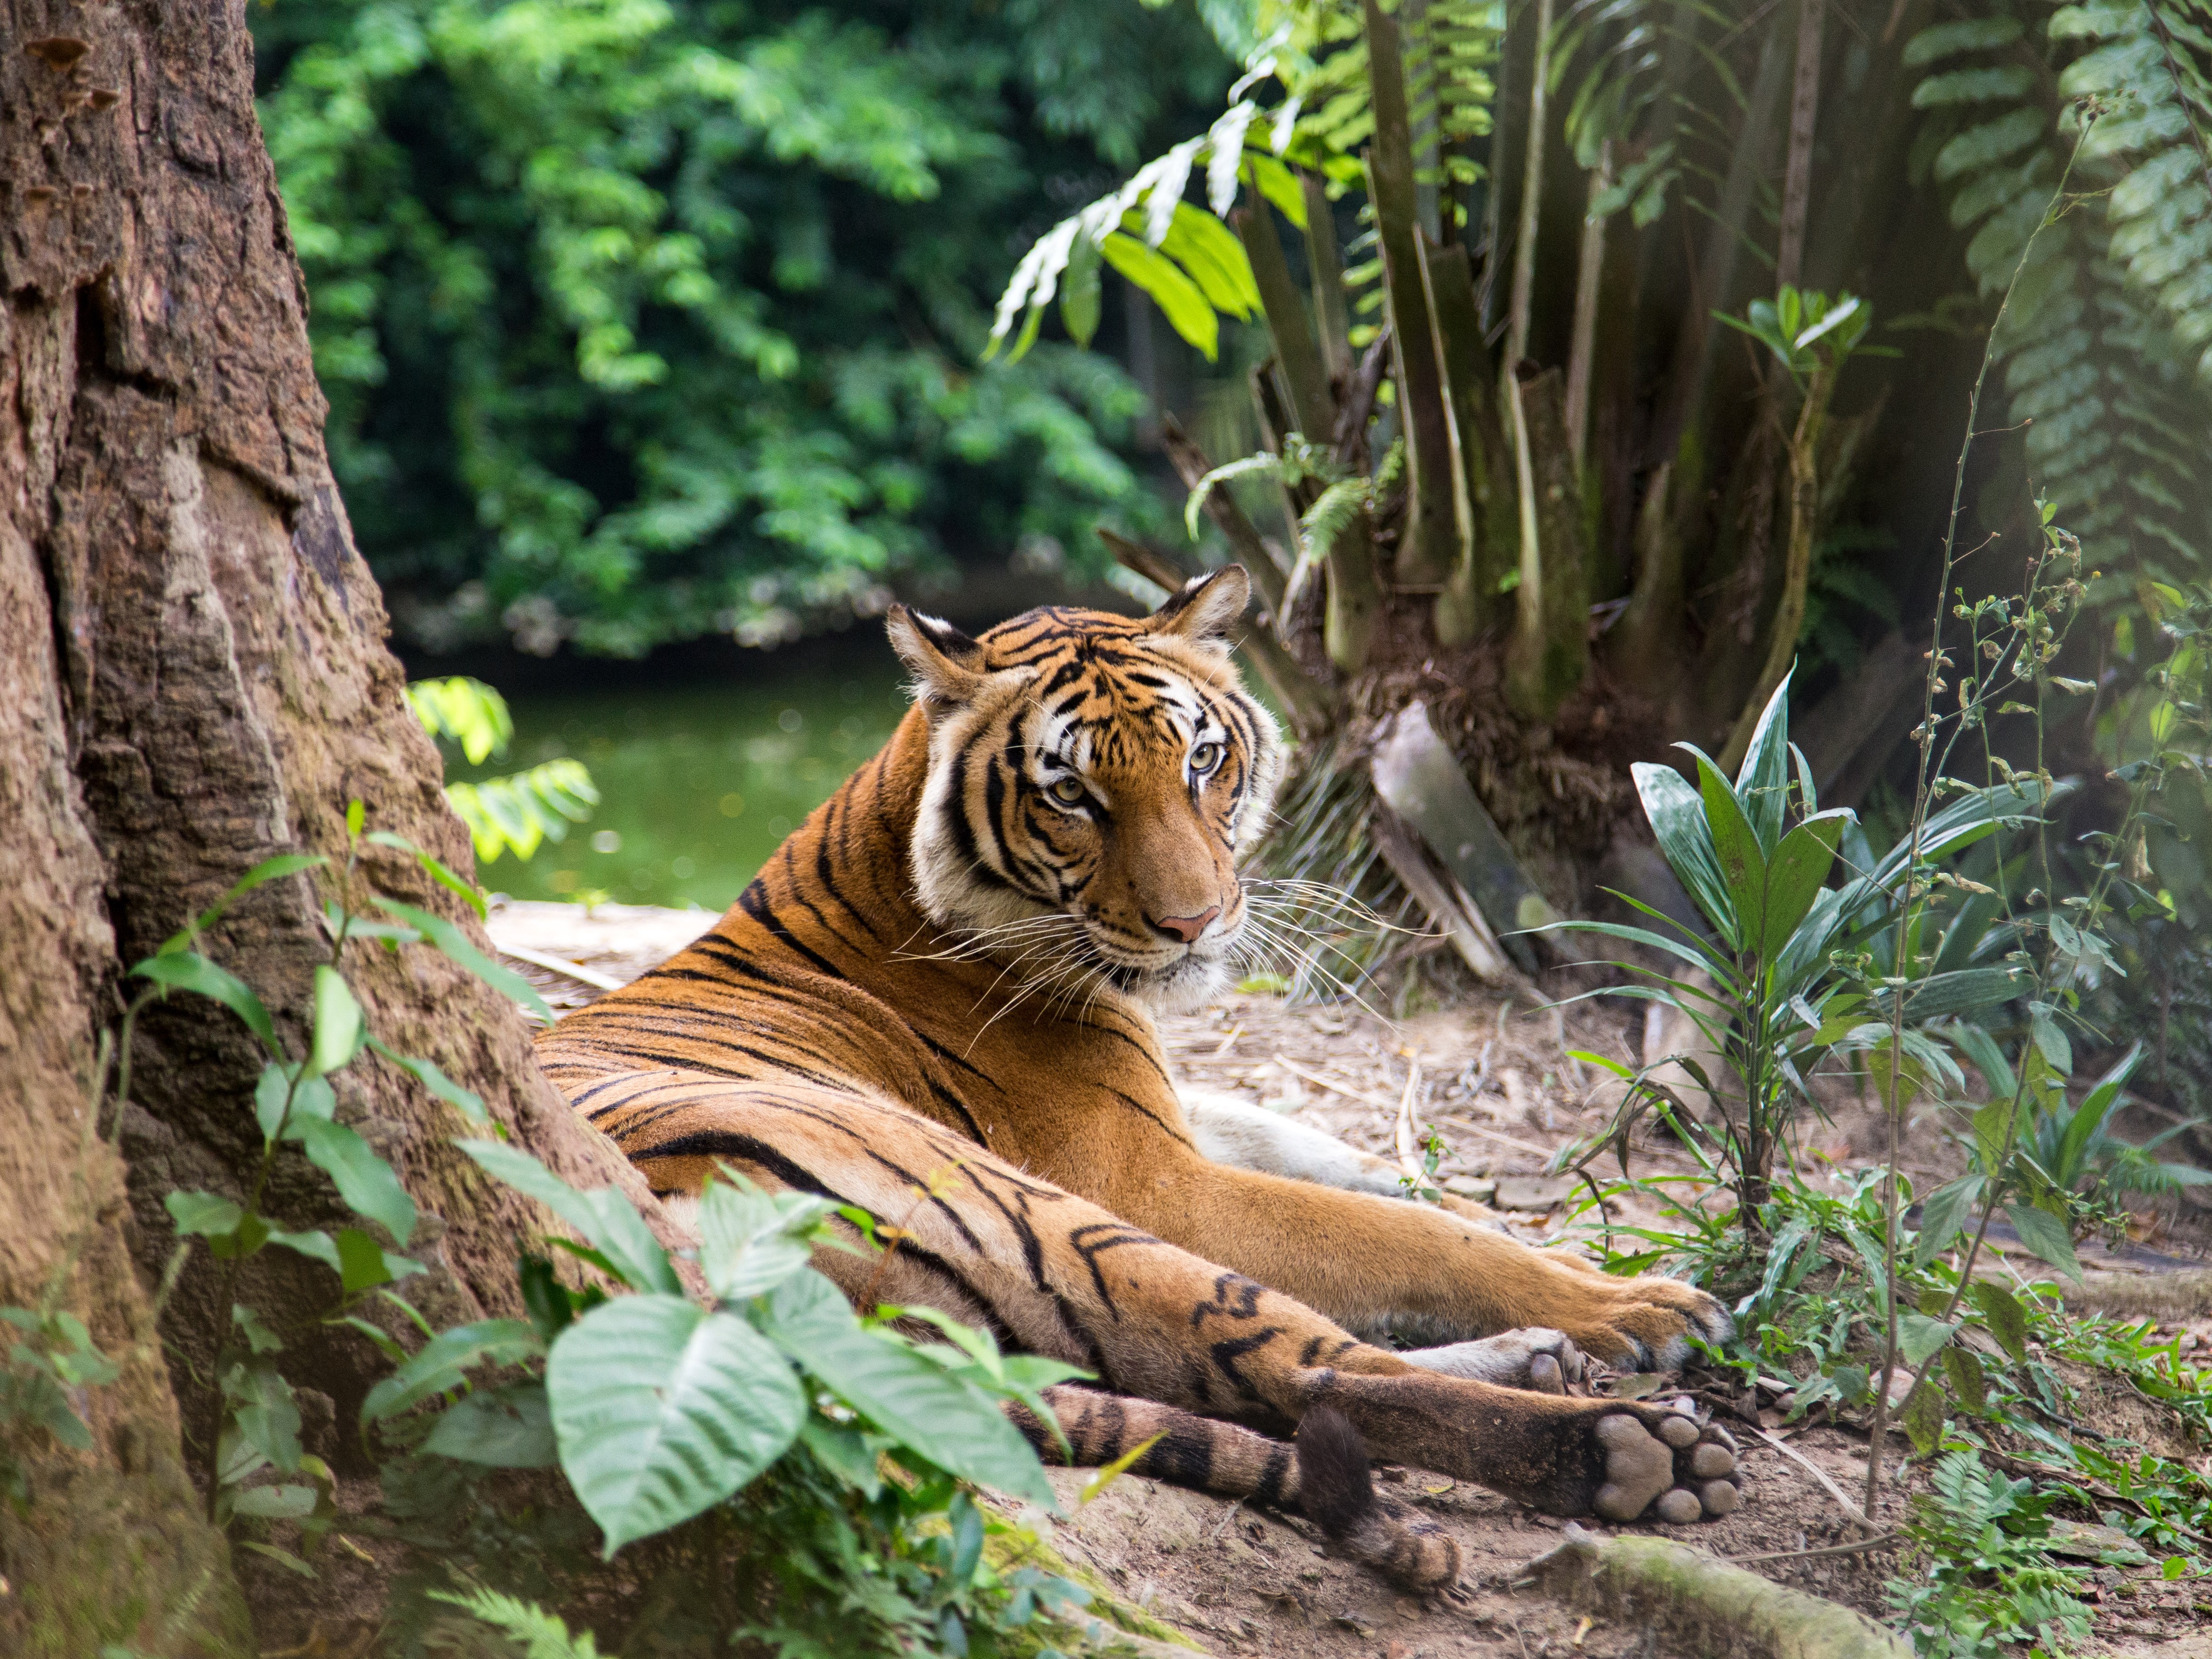 Malayan-tiger-GettyImages-636472954.jpg